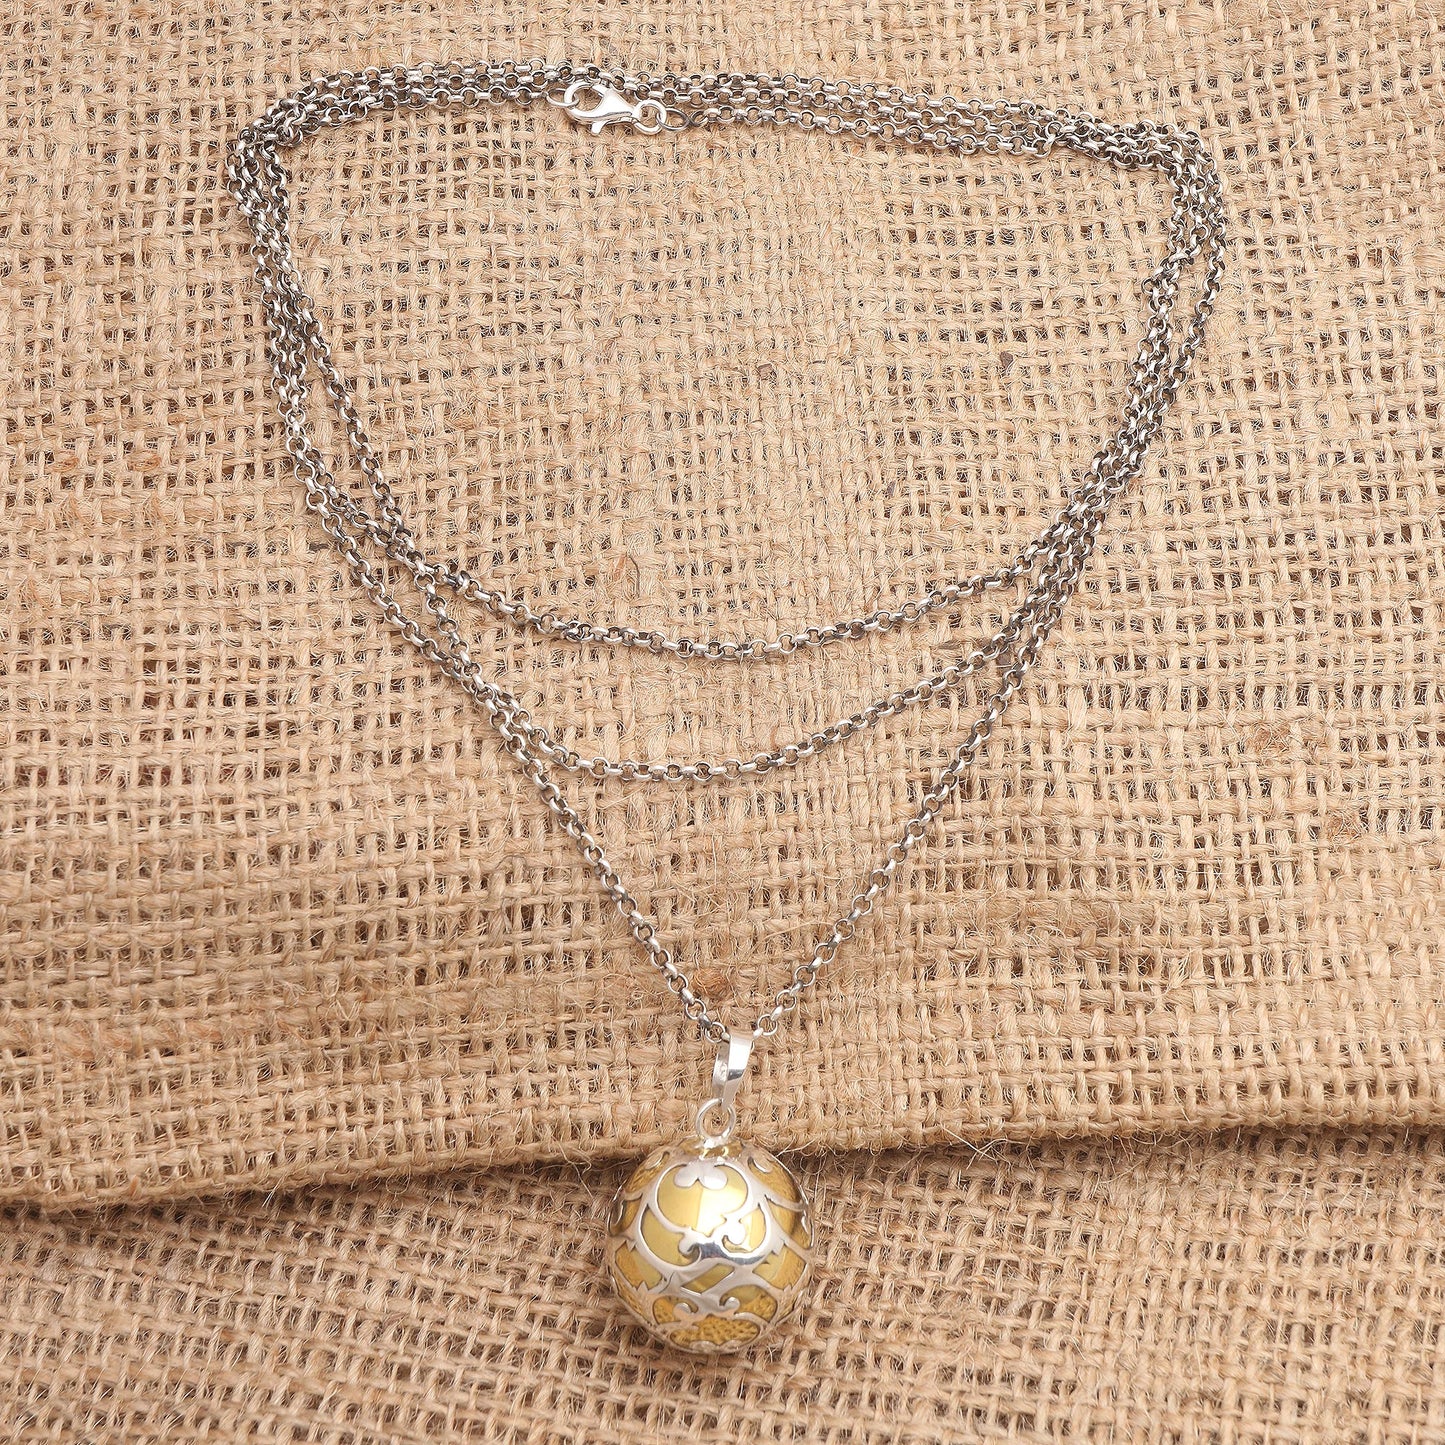 Becoming Bali Harmony Ball Necklace Handcrafted of Sterling Silver